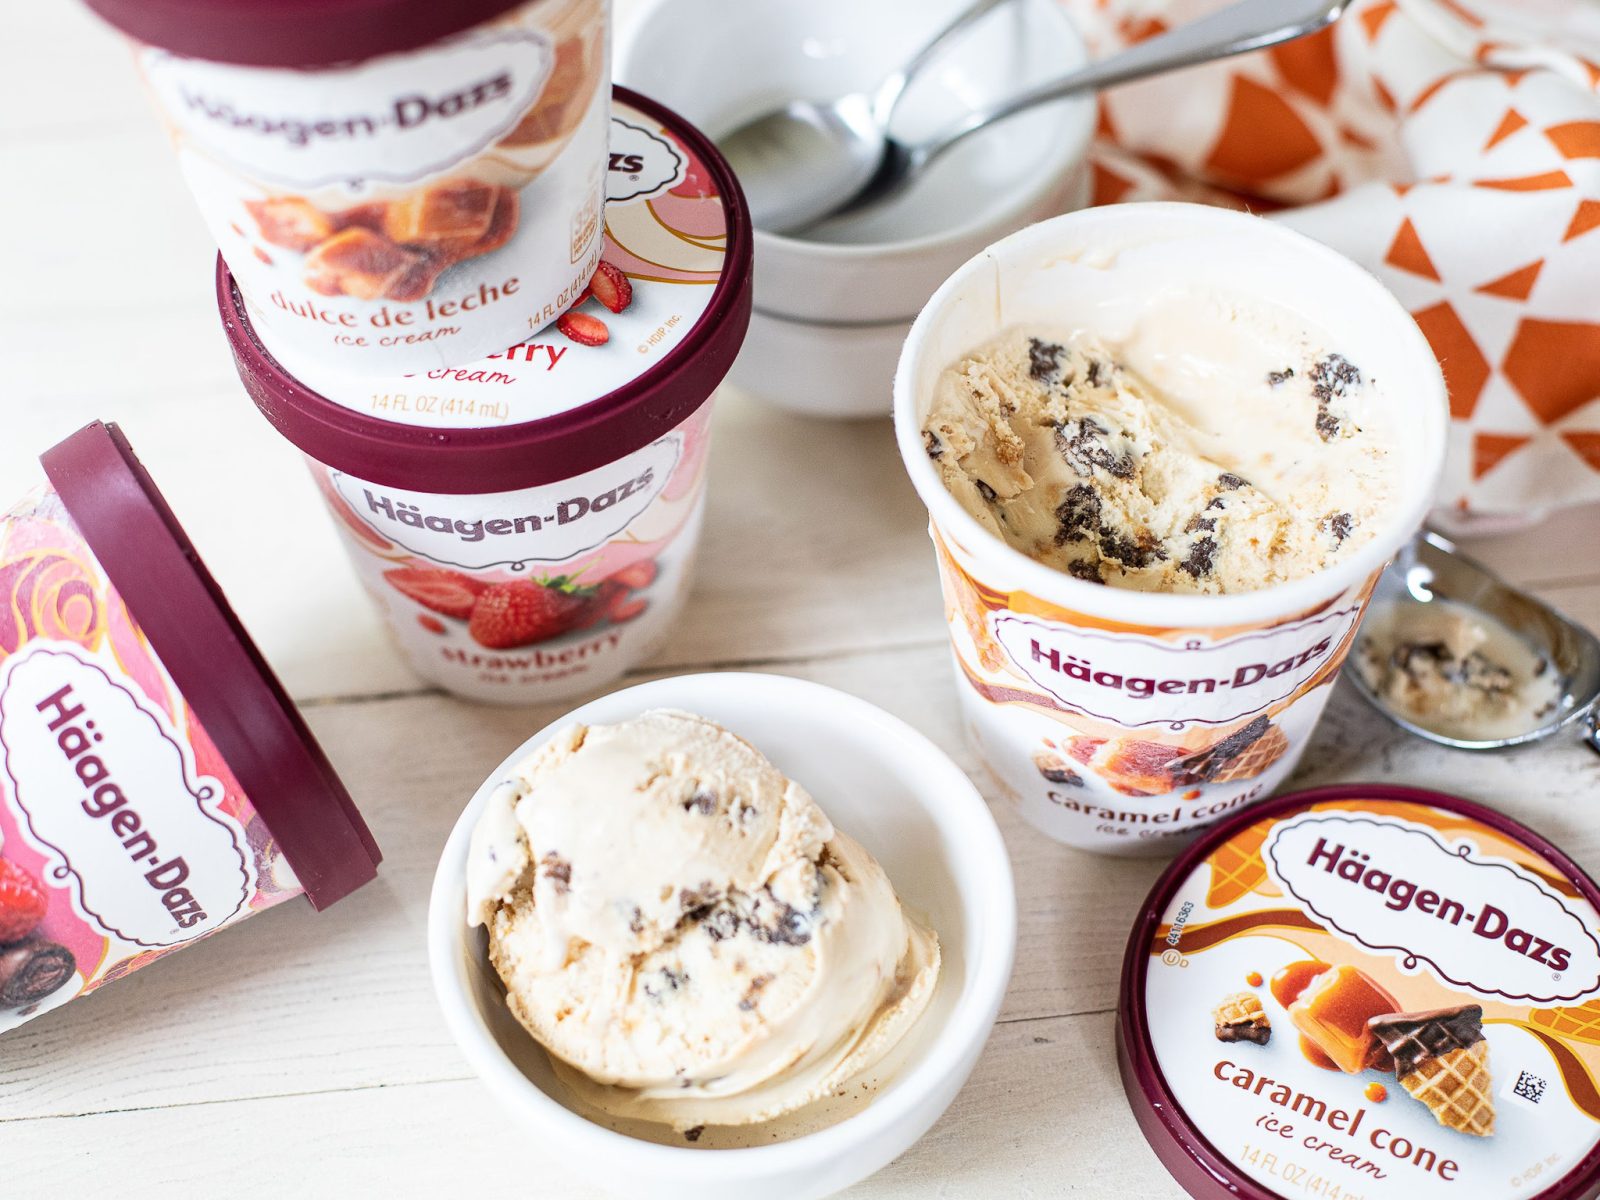 Keep The Summer Fun Going With The Delicious Taste Of Häagen-Dazs® – Buy One, Get One FREE At Publix!